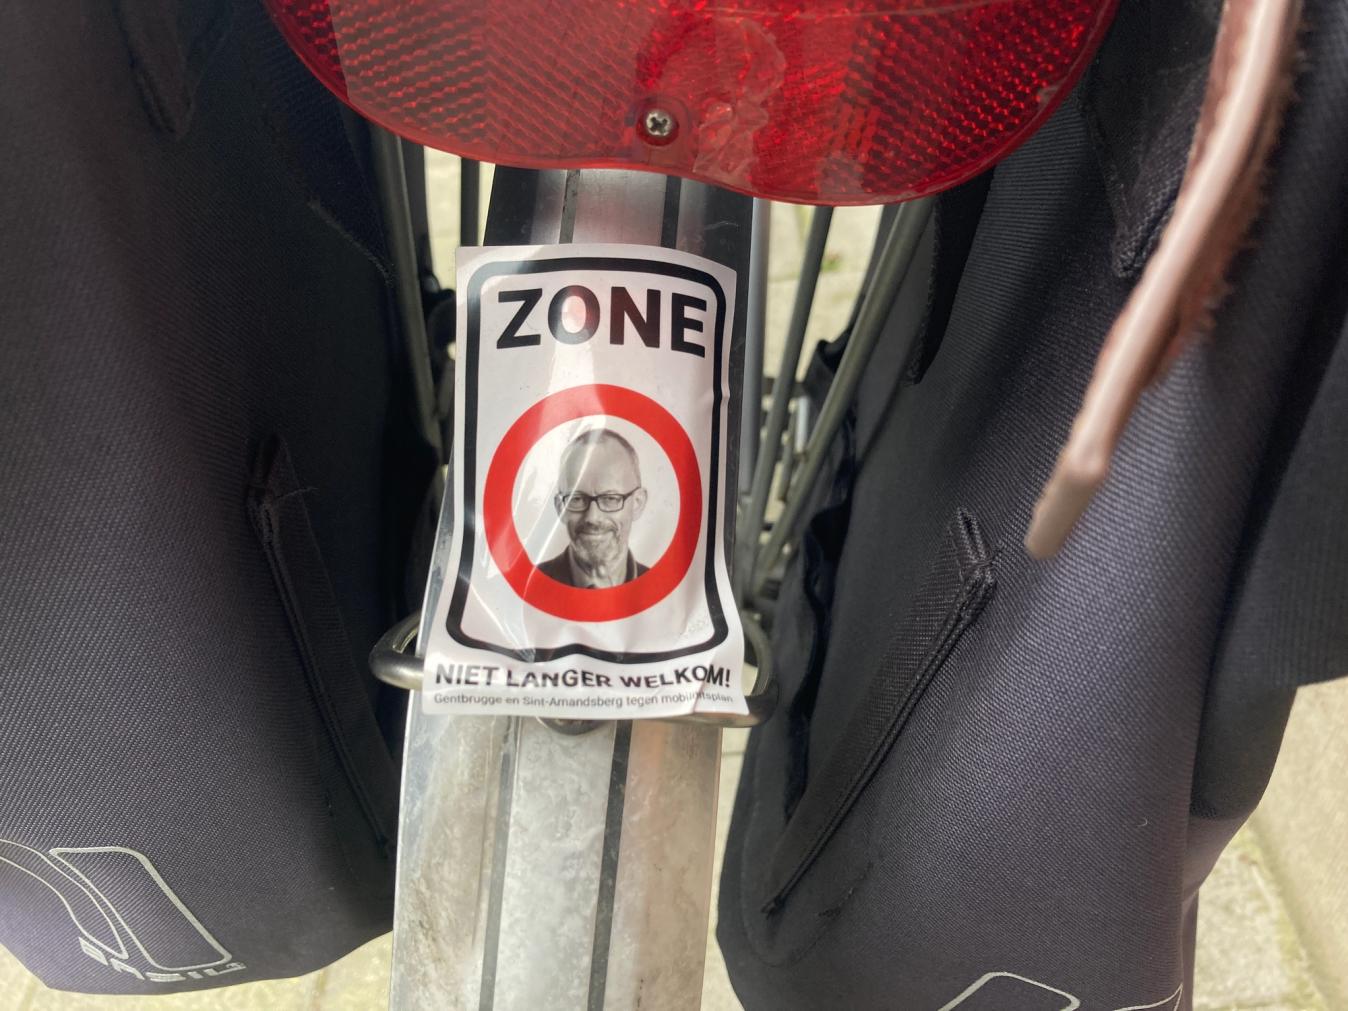 Not longer welcome: a sticker on a bicycle in Gent